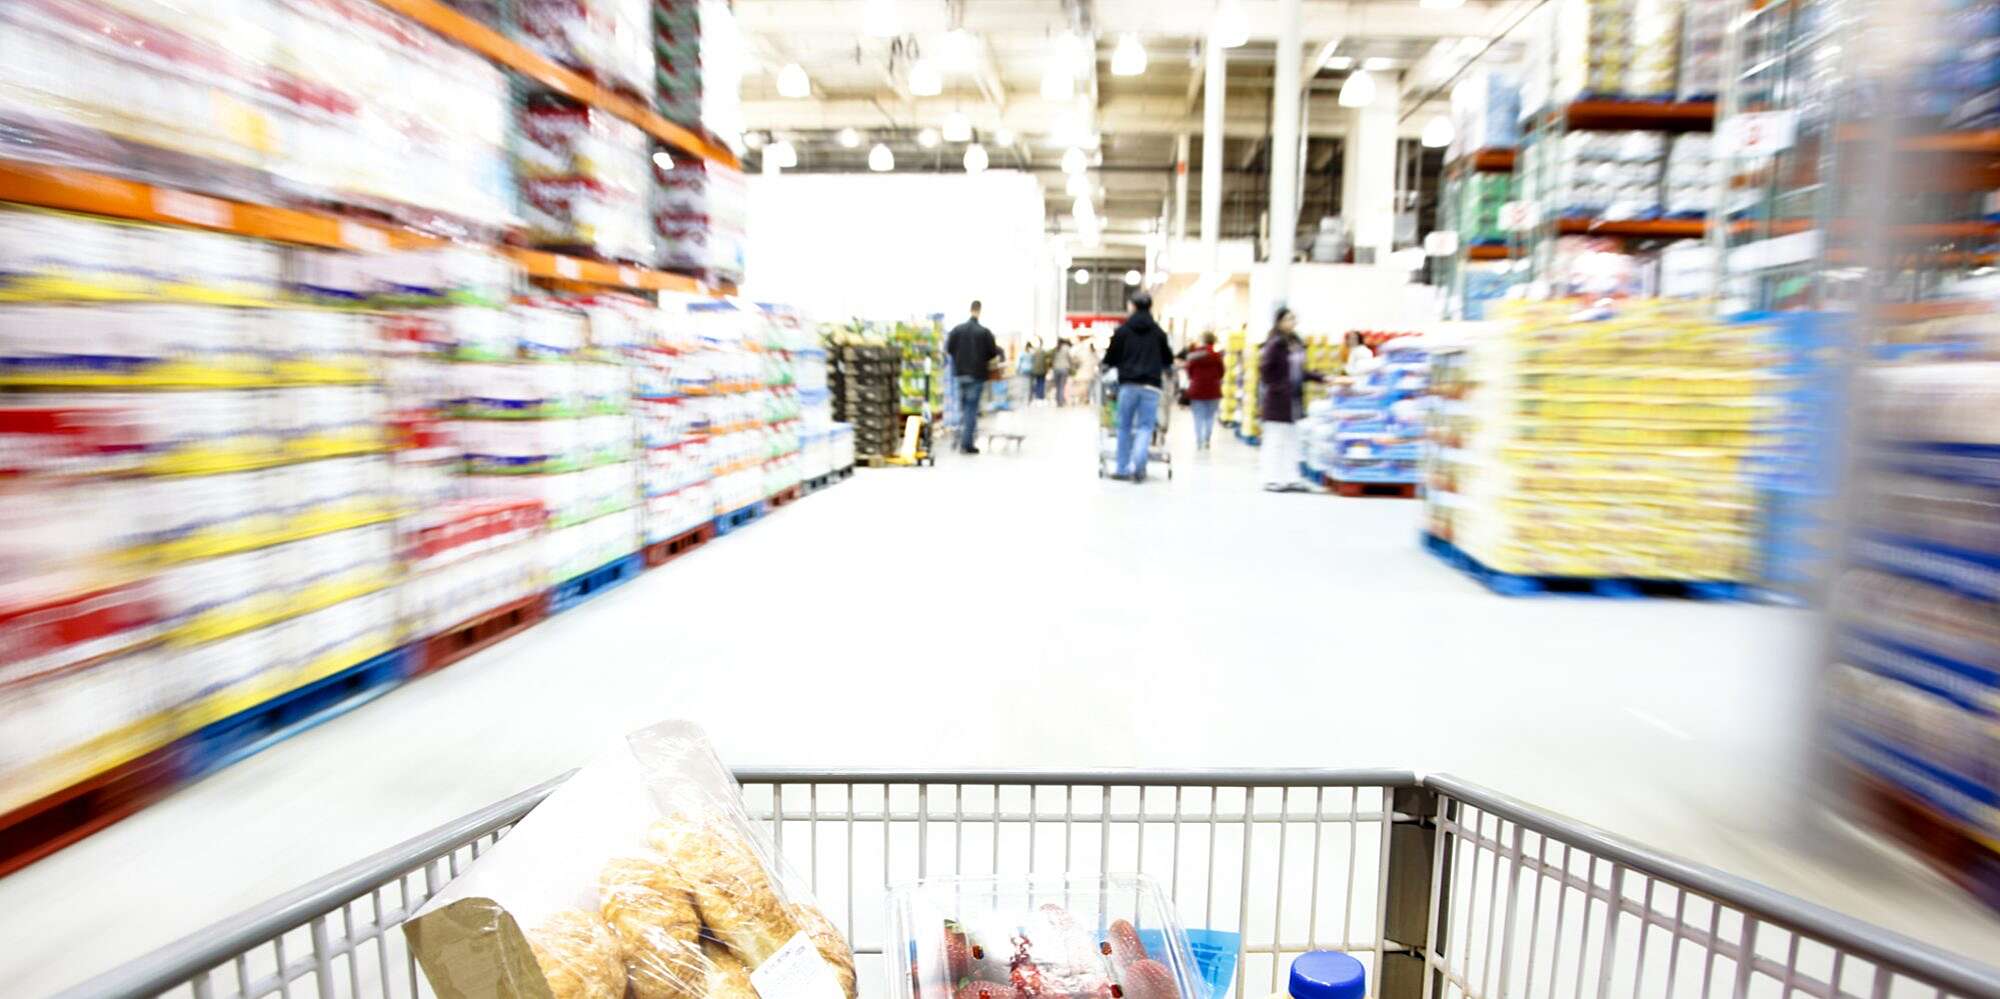 KUOW - 3 tips for shopping in the bulk foods aisle like a pro